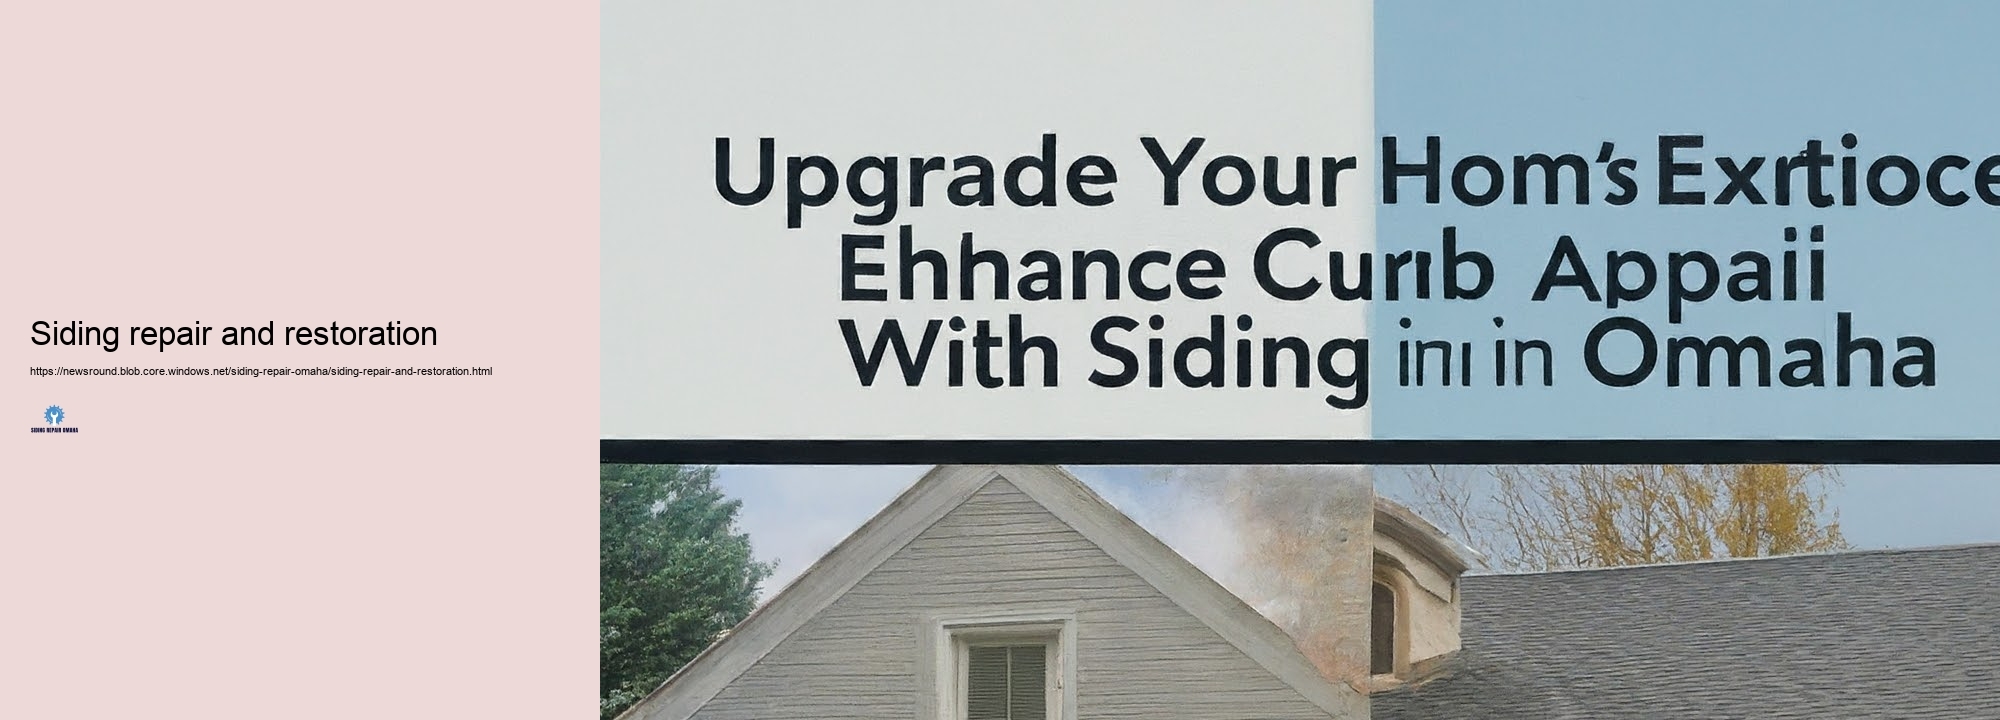 Precisely exactly how to Preserve Your Home Exterior siding: Tips from Omaha Professionals